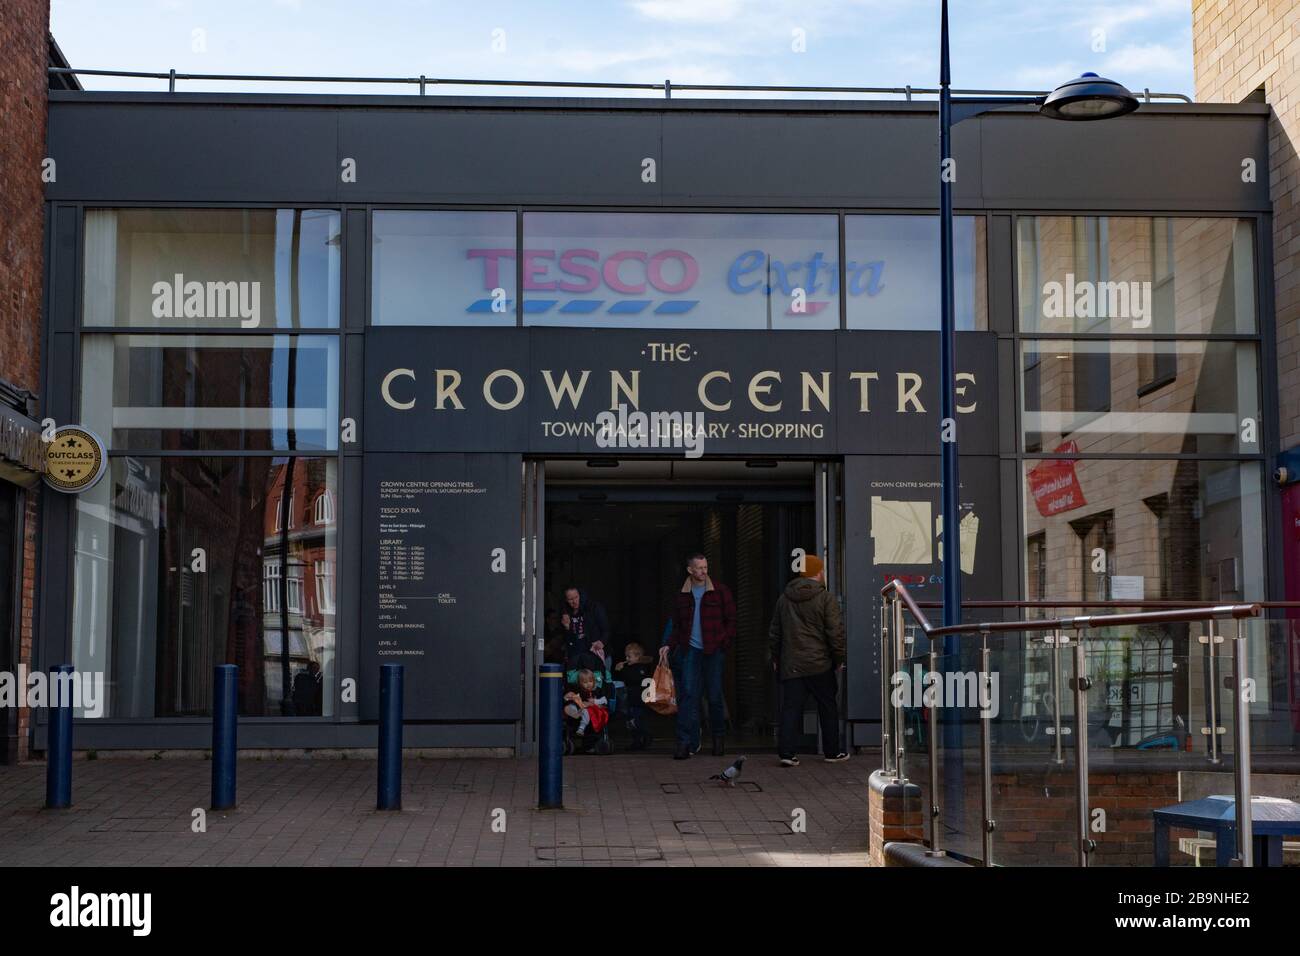 Entrance to The Crown Centre. Stourbrdige, West Midlands. March 2020, day before Coronavirus lockdown. Stock Photo